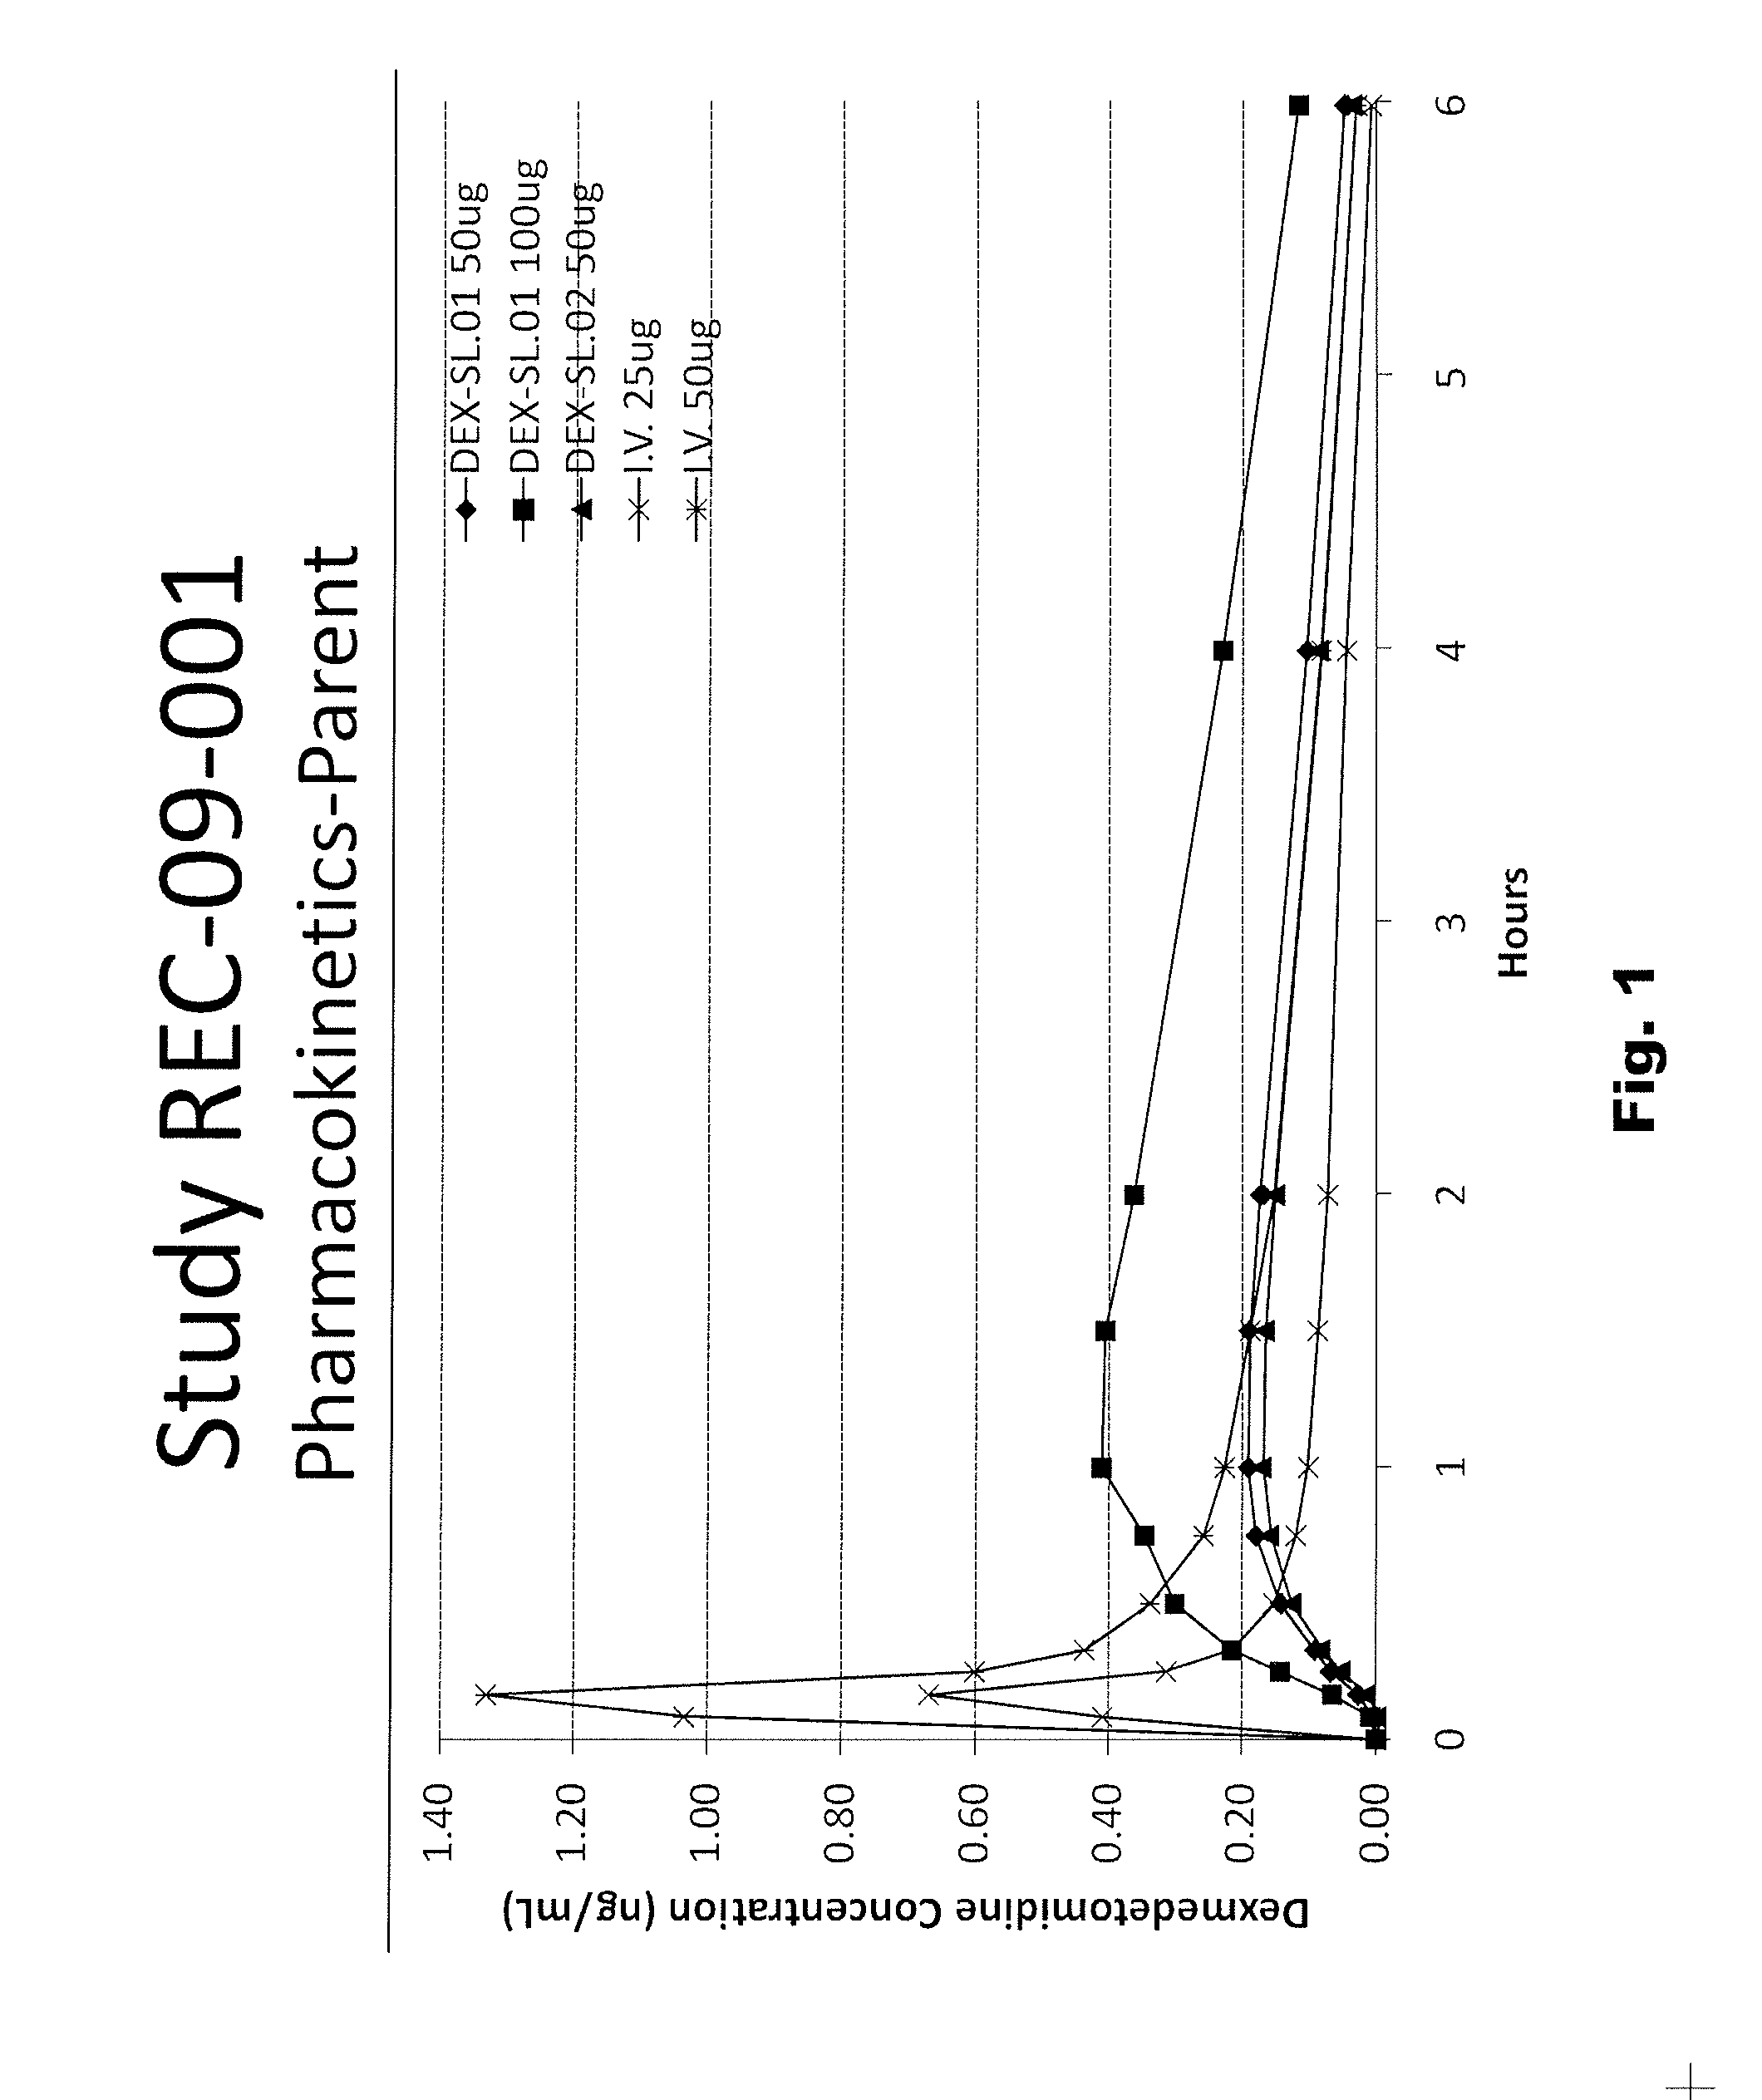 Sublingual dexmeditomidine compositions and methods of use thereof